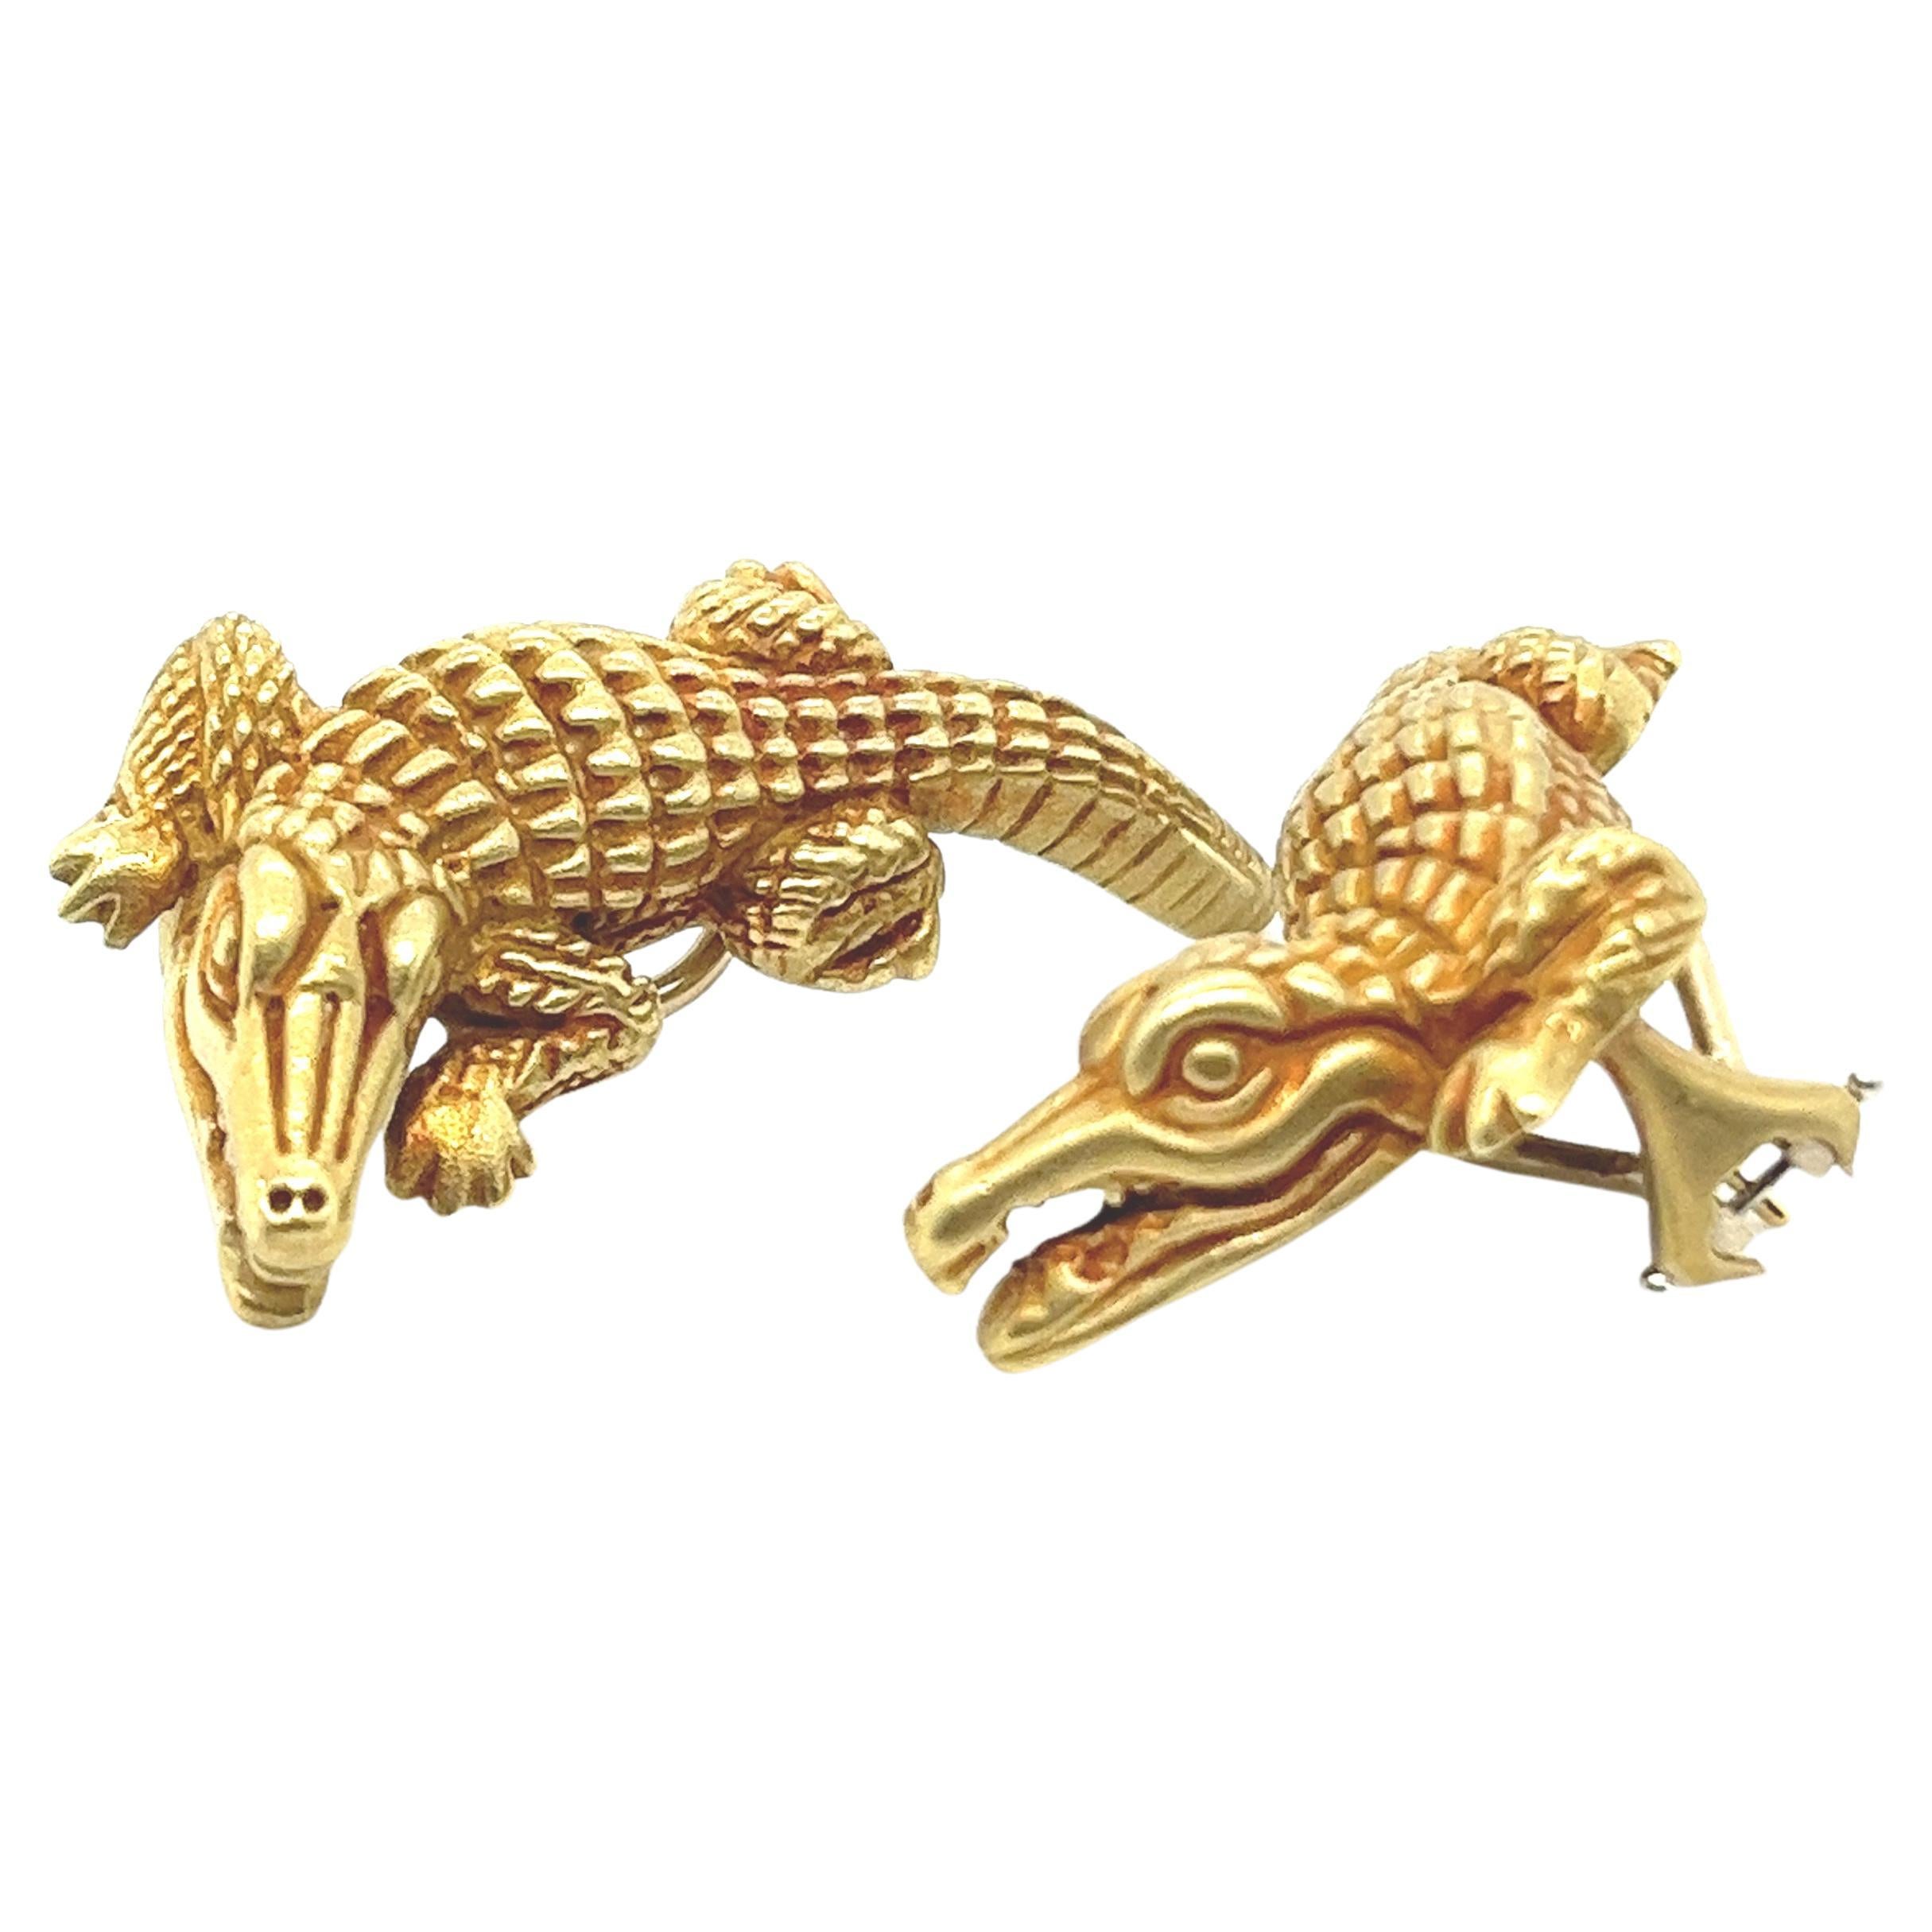 Eye-catching pair of 18 karat yellow gold alligator earrings by Kieselstein-Cord, 1988. 

Crafted in 18 karat yellow gold and designed to be worn up the lobe, these fabulous alligator earrings are completed by omega clip backs and fine studs provide